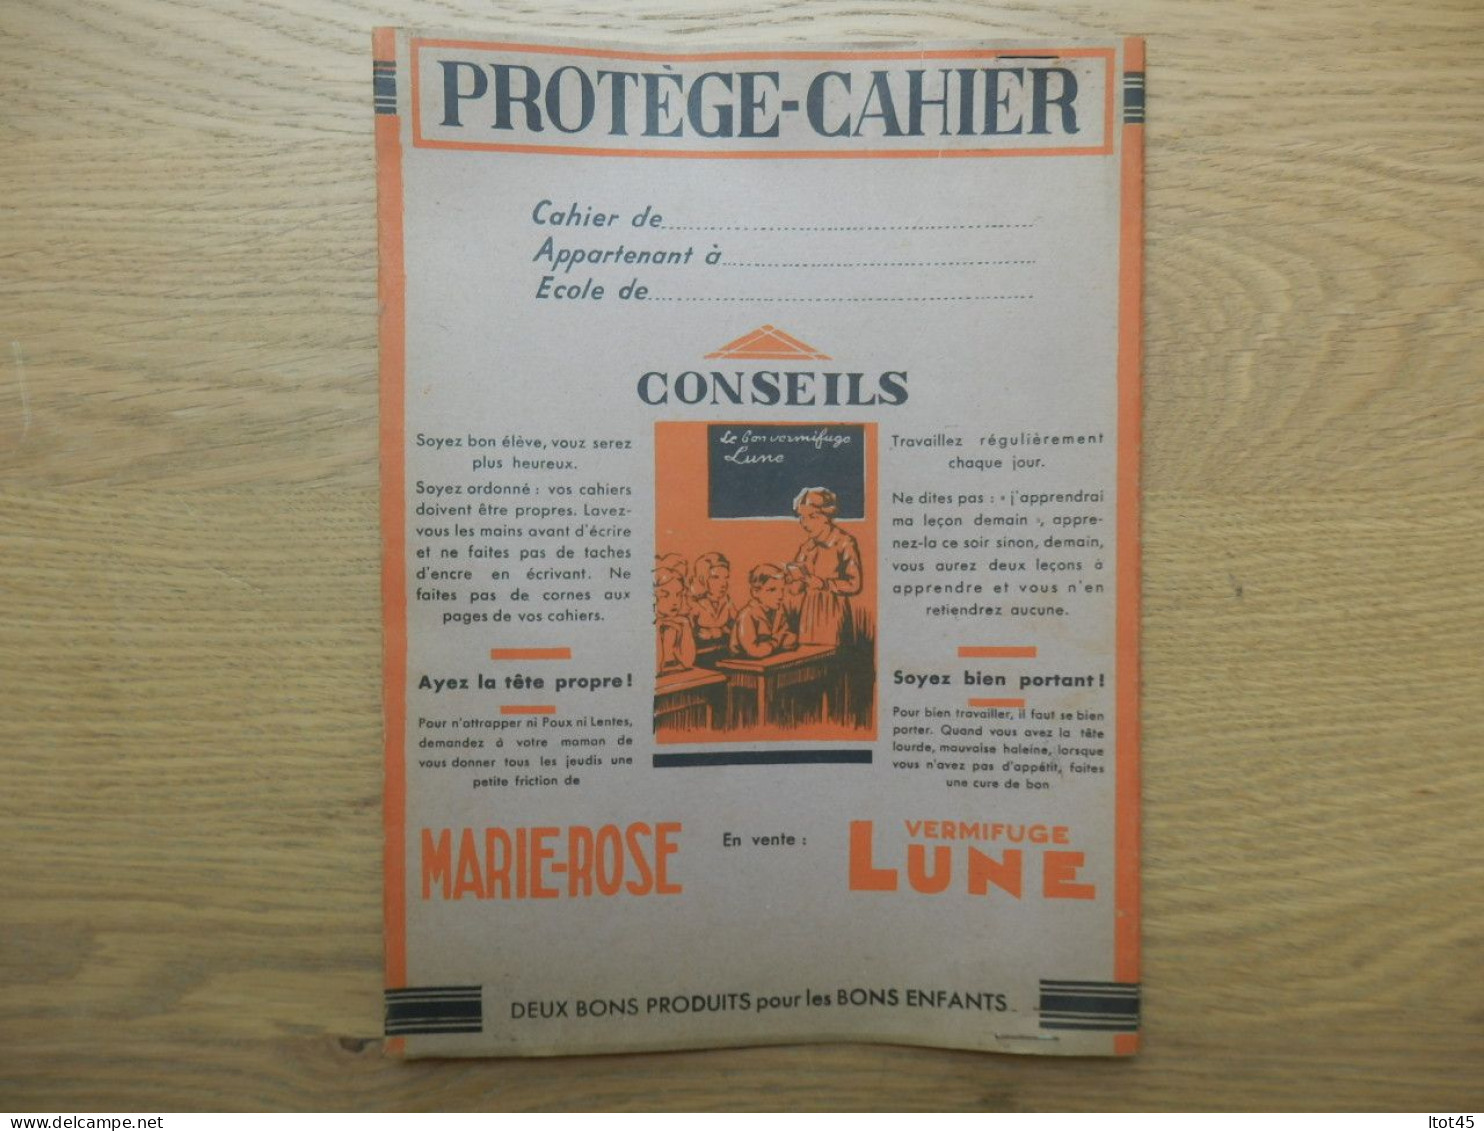 PROTEGE-CAHIER MARIE-ROSE VERMIFUGE LUNE - Book Covers